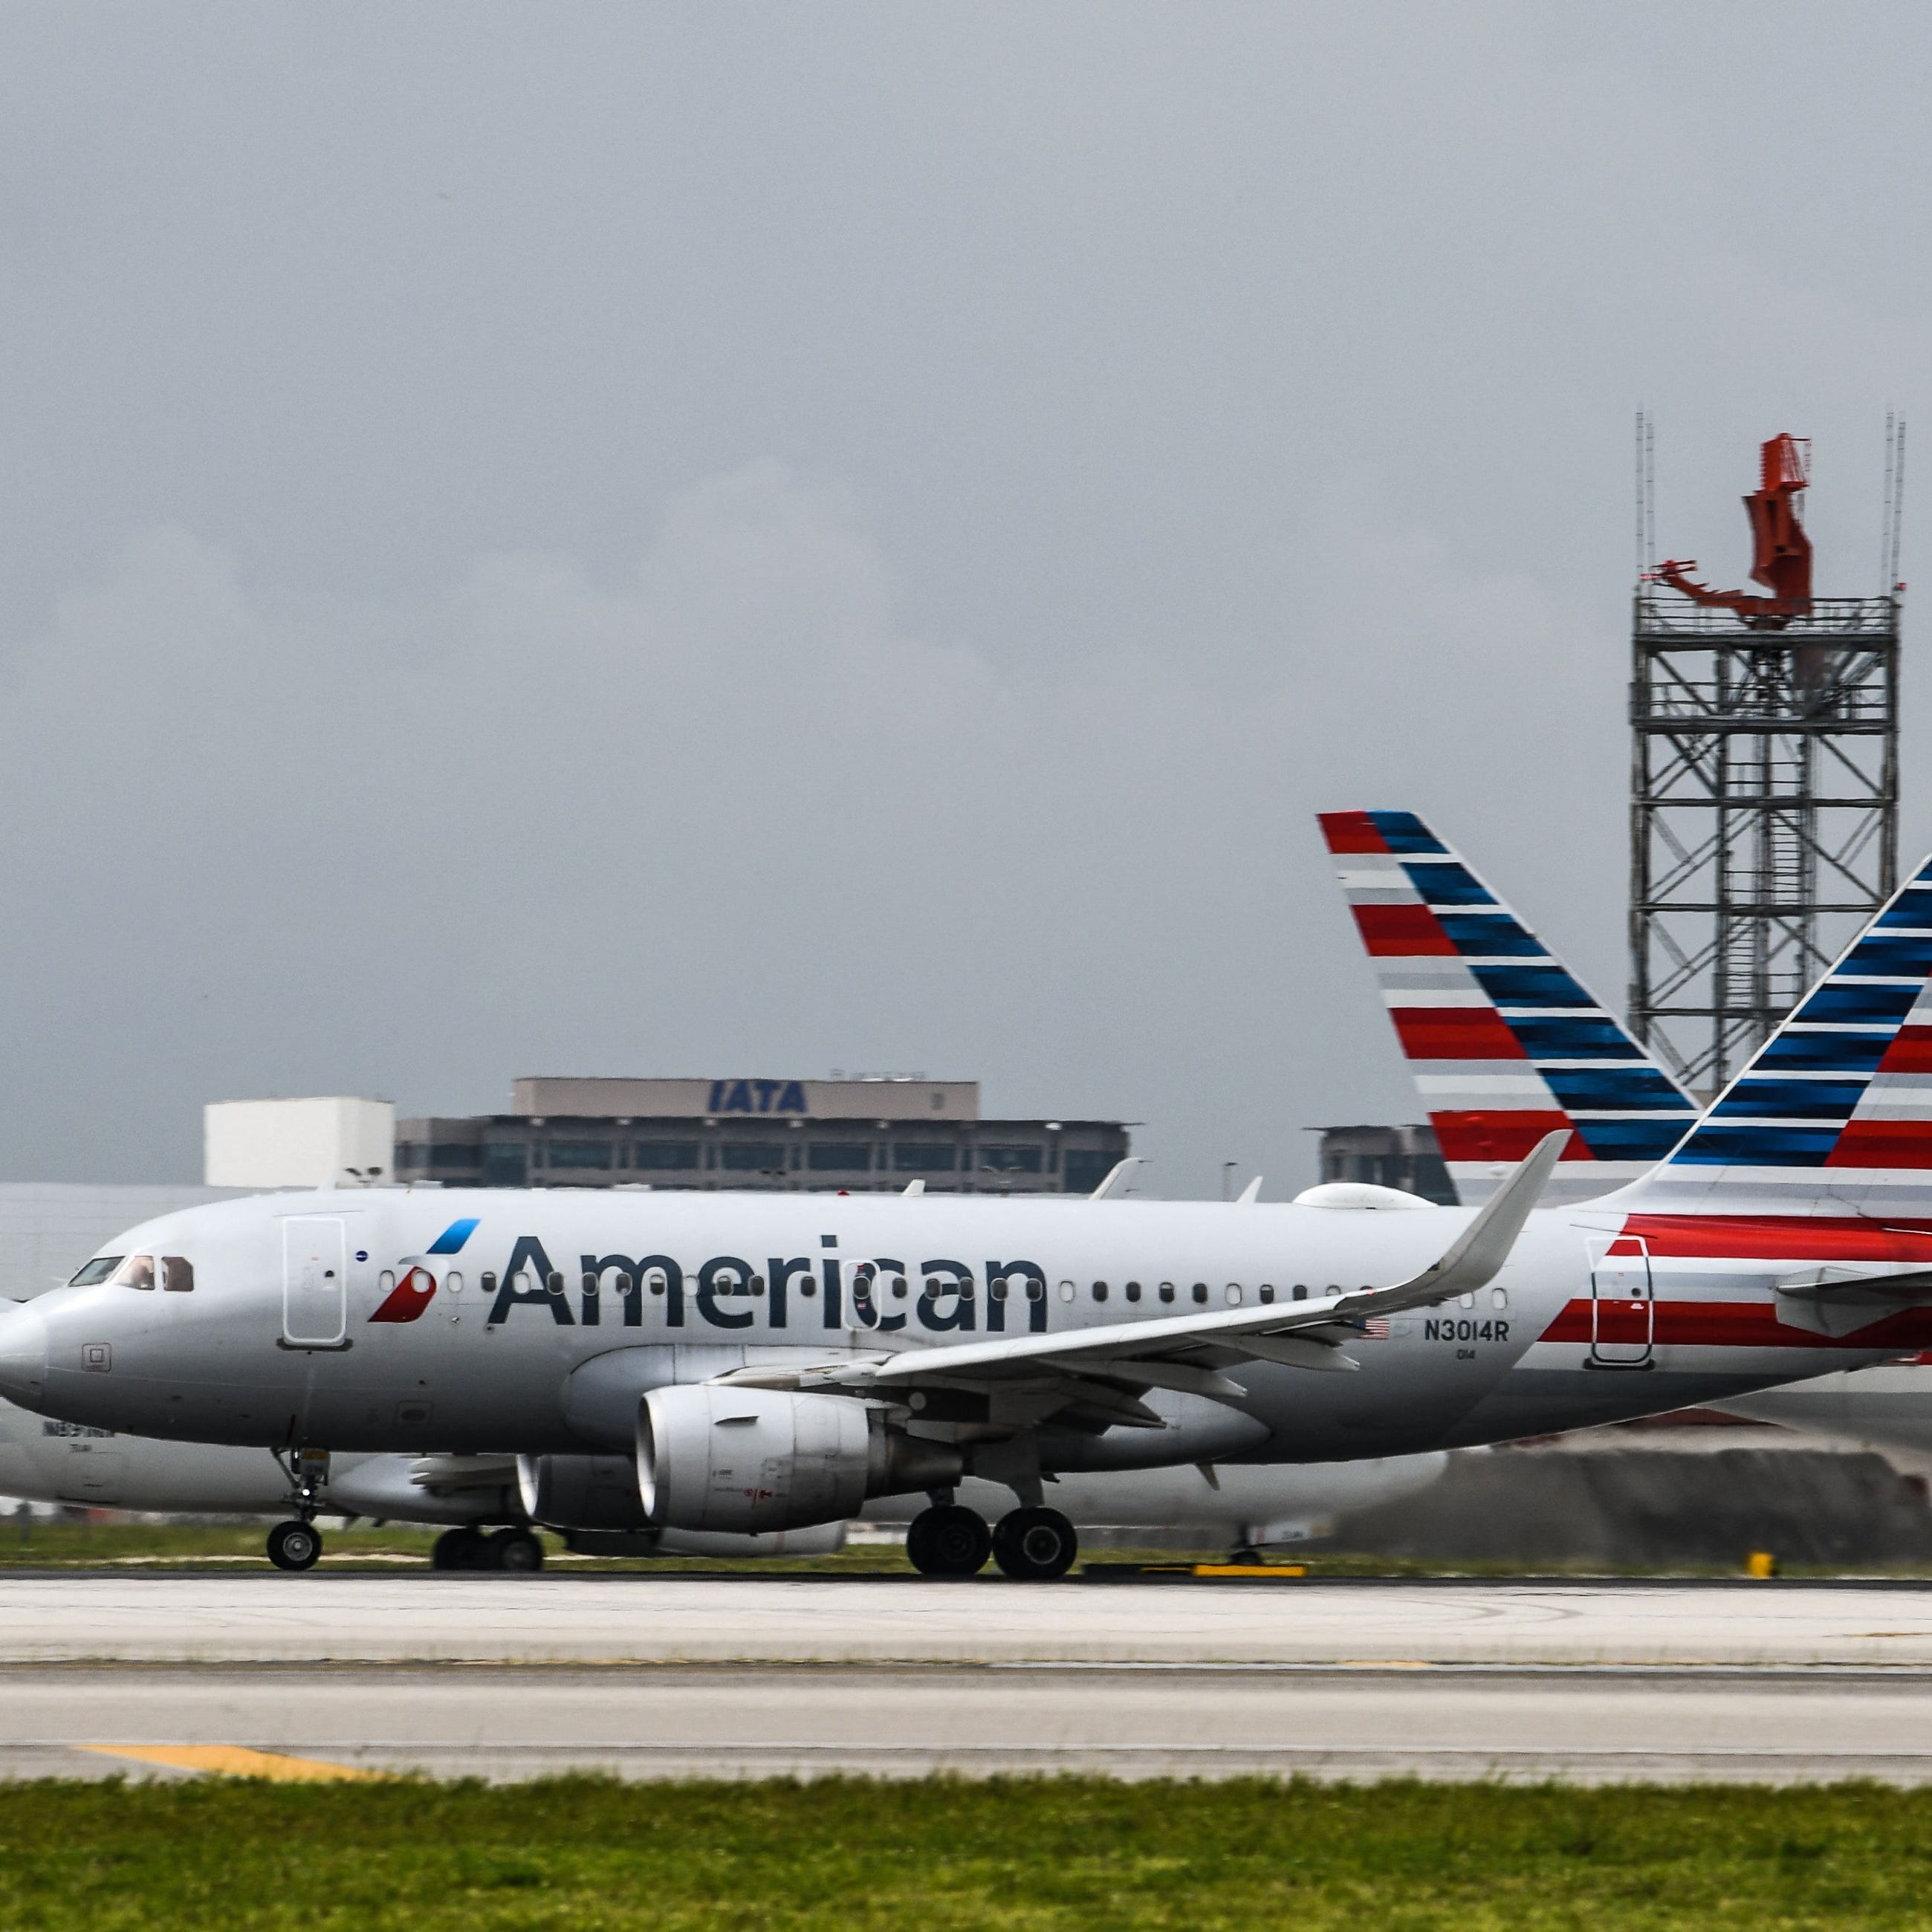 (FILES) In this file photo taken on June 16, 2021, American Airlines planes taxi at Miami International Airport in Miami. - American Airlines reported its first profitable quarter since Covid-19 broke out on July 22, 2021, and said current booking trends will lift travel volumes closer to pre-pandemic levels in the third quarter. (Photo by CHANDAN KHANNA / AFP) (Photo by CHANDAN KHANNA/AFP via Getty Images) ORG XMIT: 0 ORIG FILE ID: AFP_9FM9A8.jpg